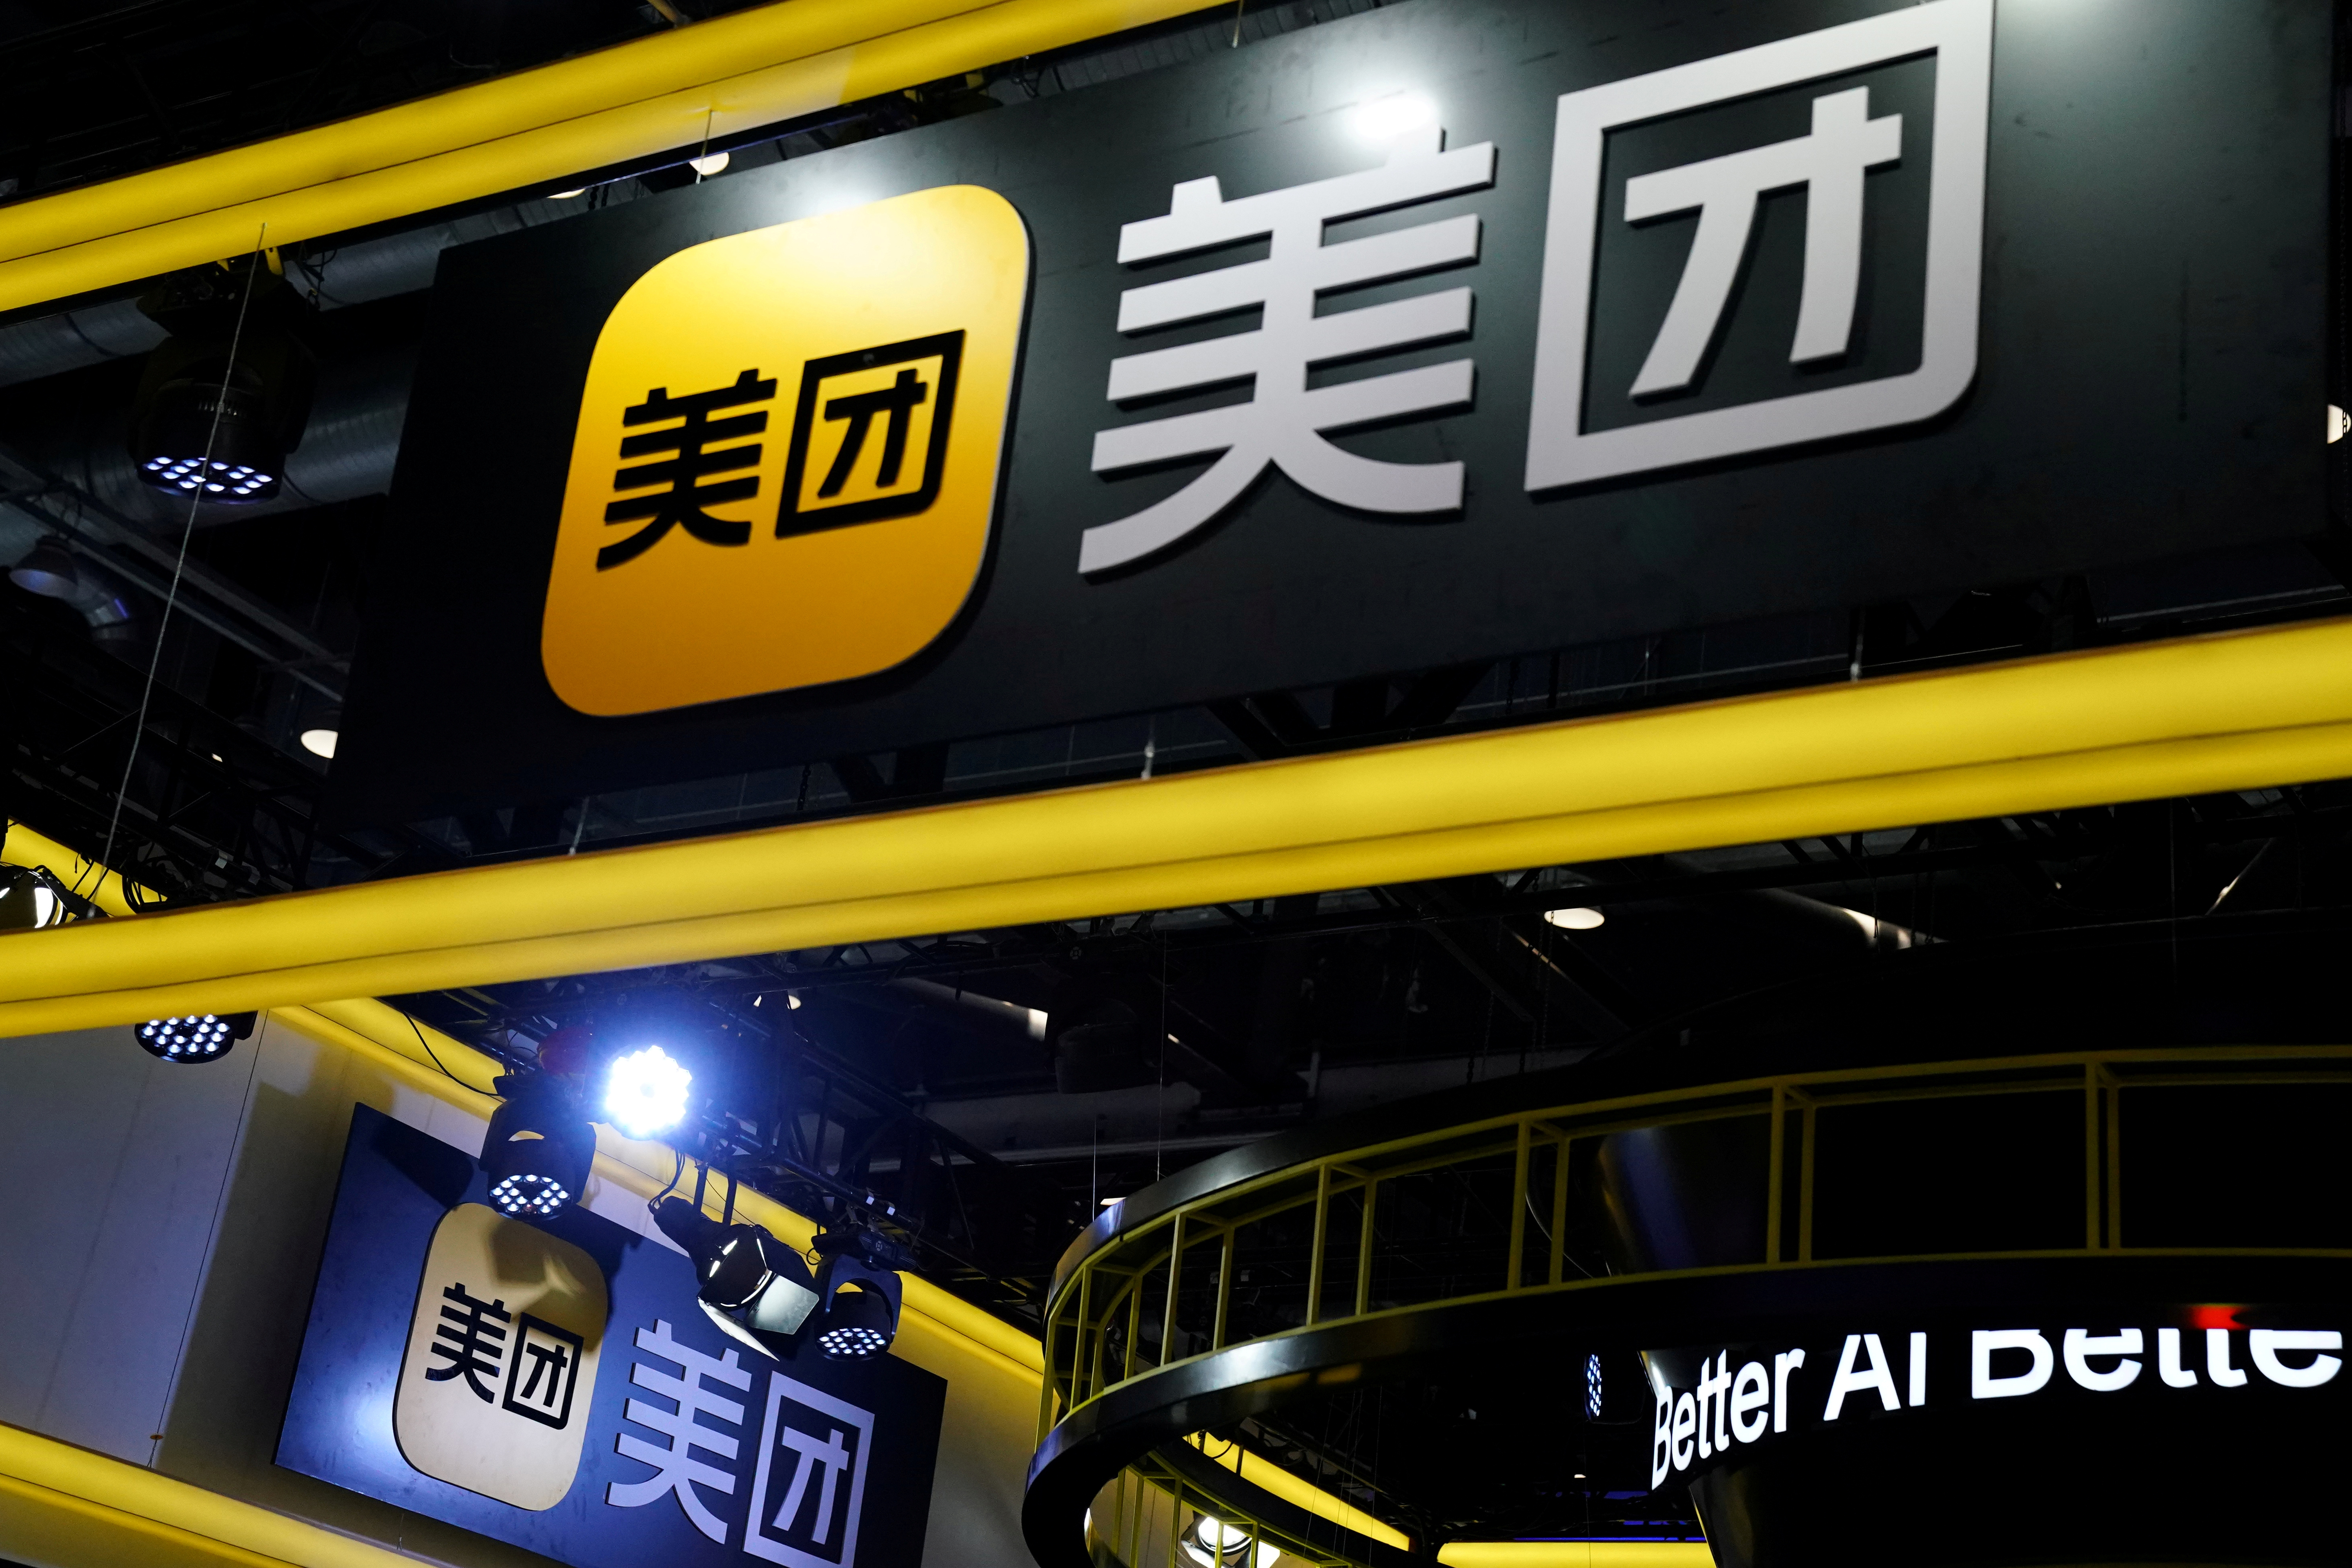 Signs of Meituan are seen at its booth at the 2020 China International Fair for Trade in Services in Beijing